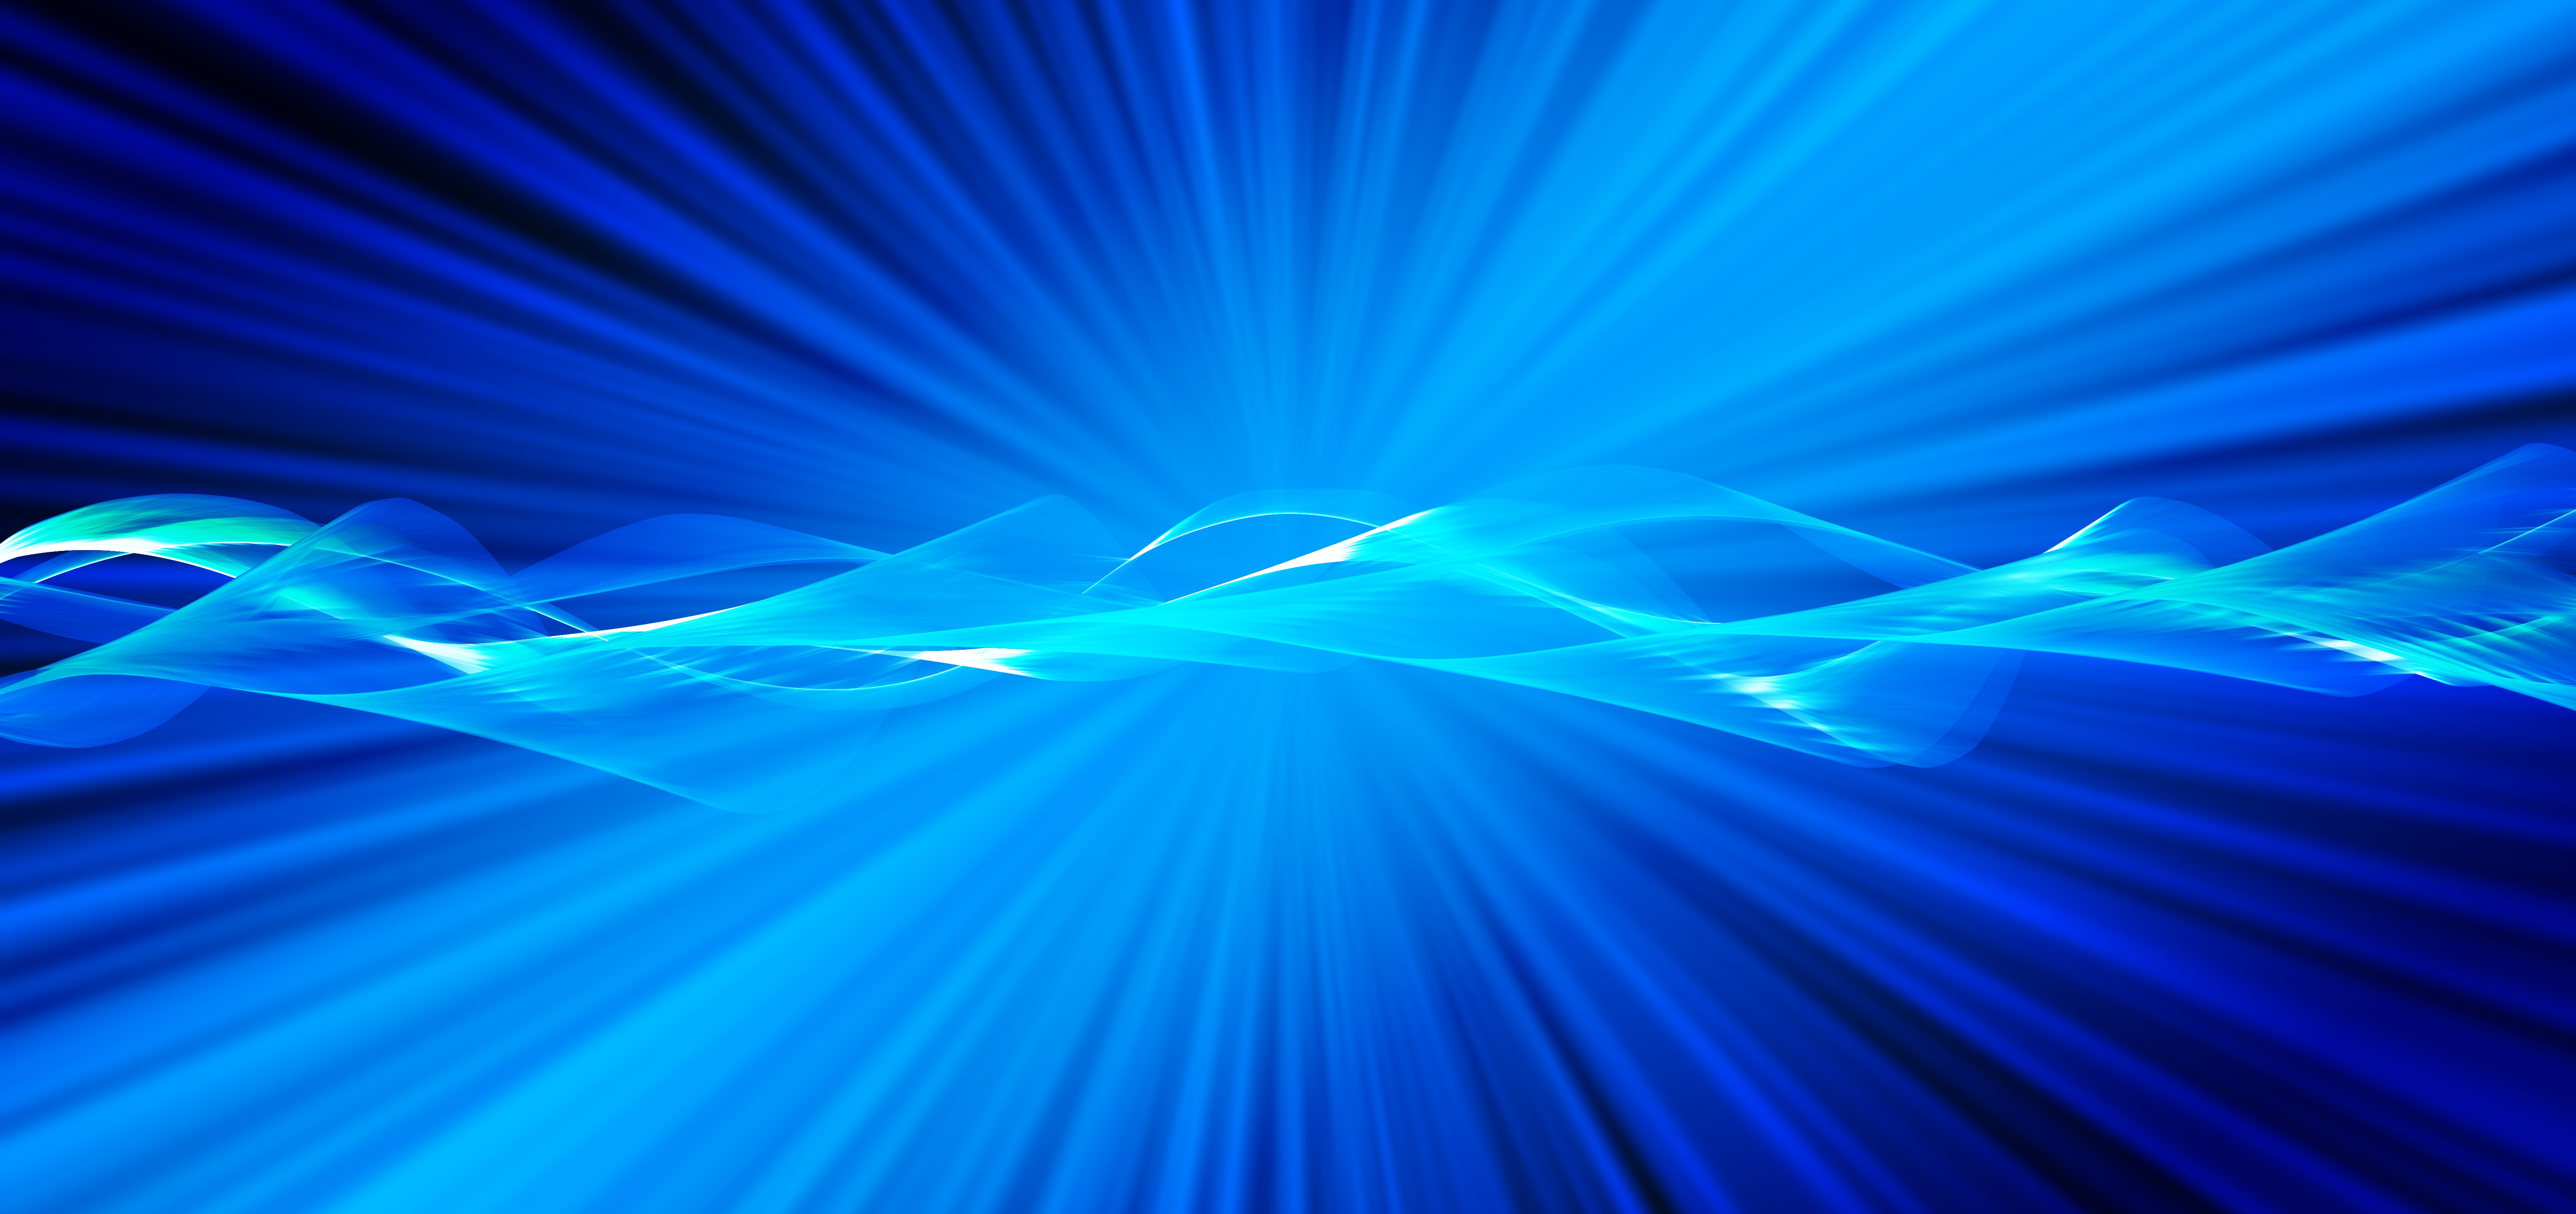 Wallpapers rays lines bright on the desktop